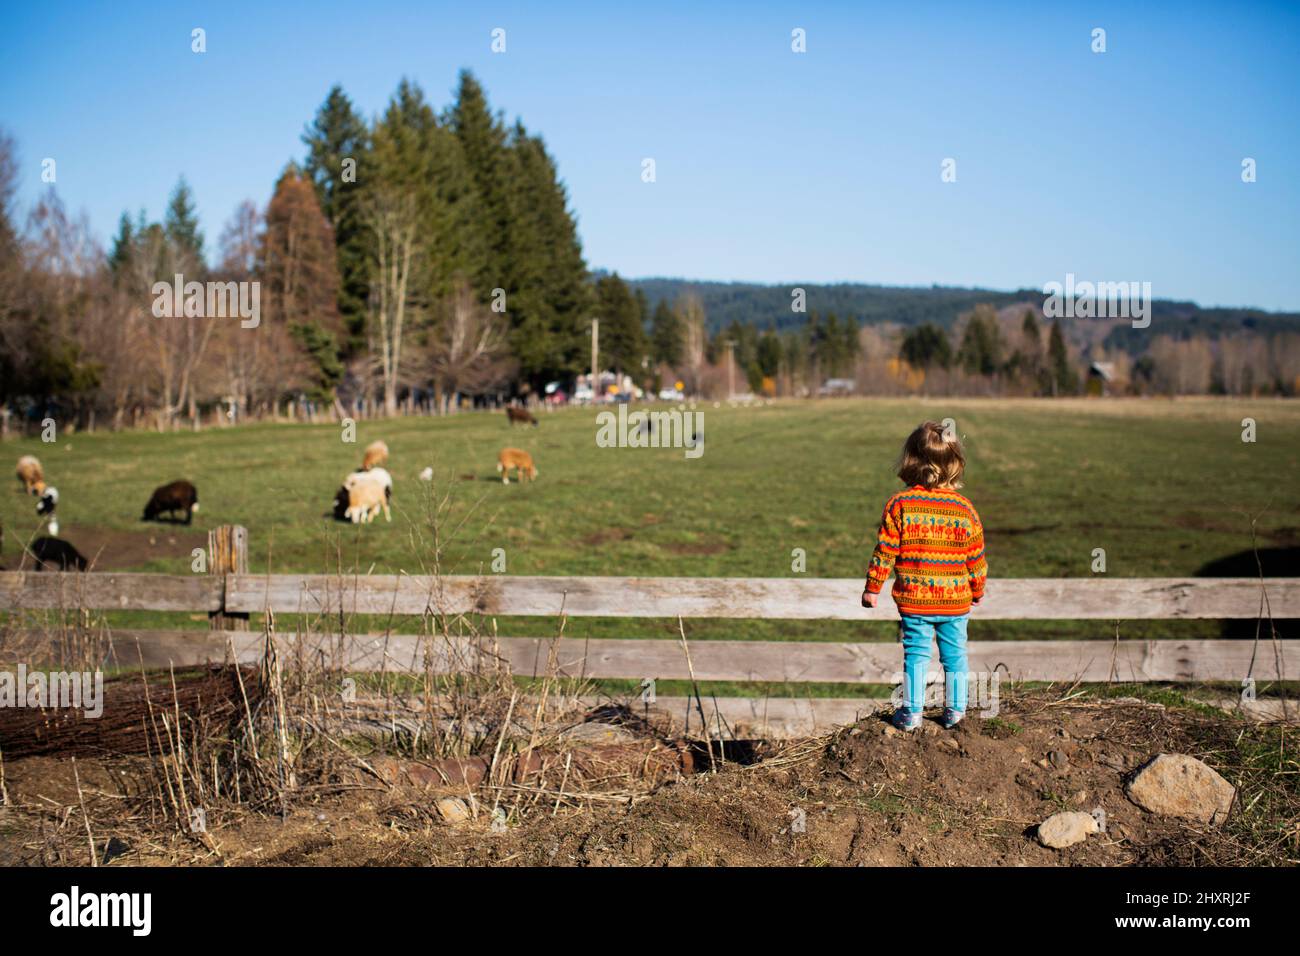 A young girl looks across pasture of sheep Stock Photo